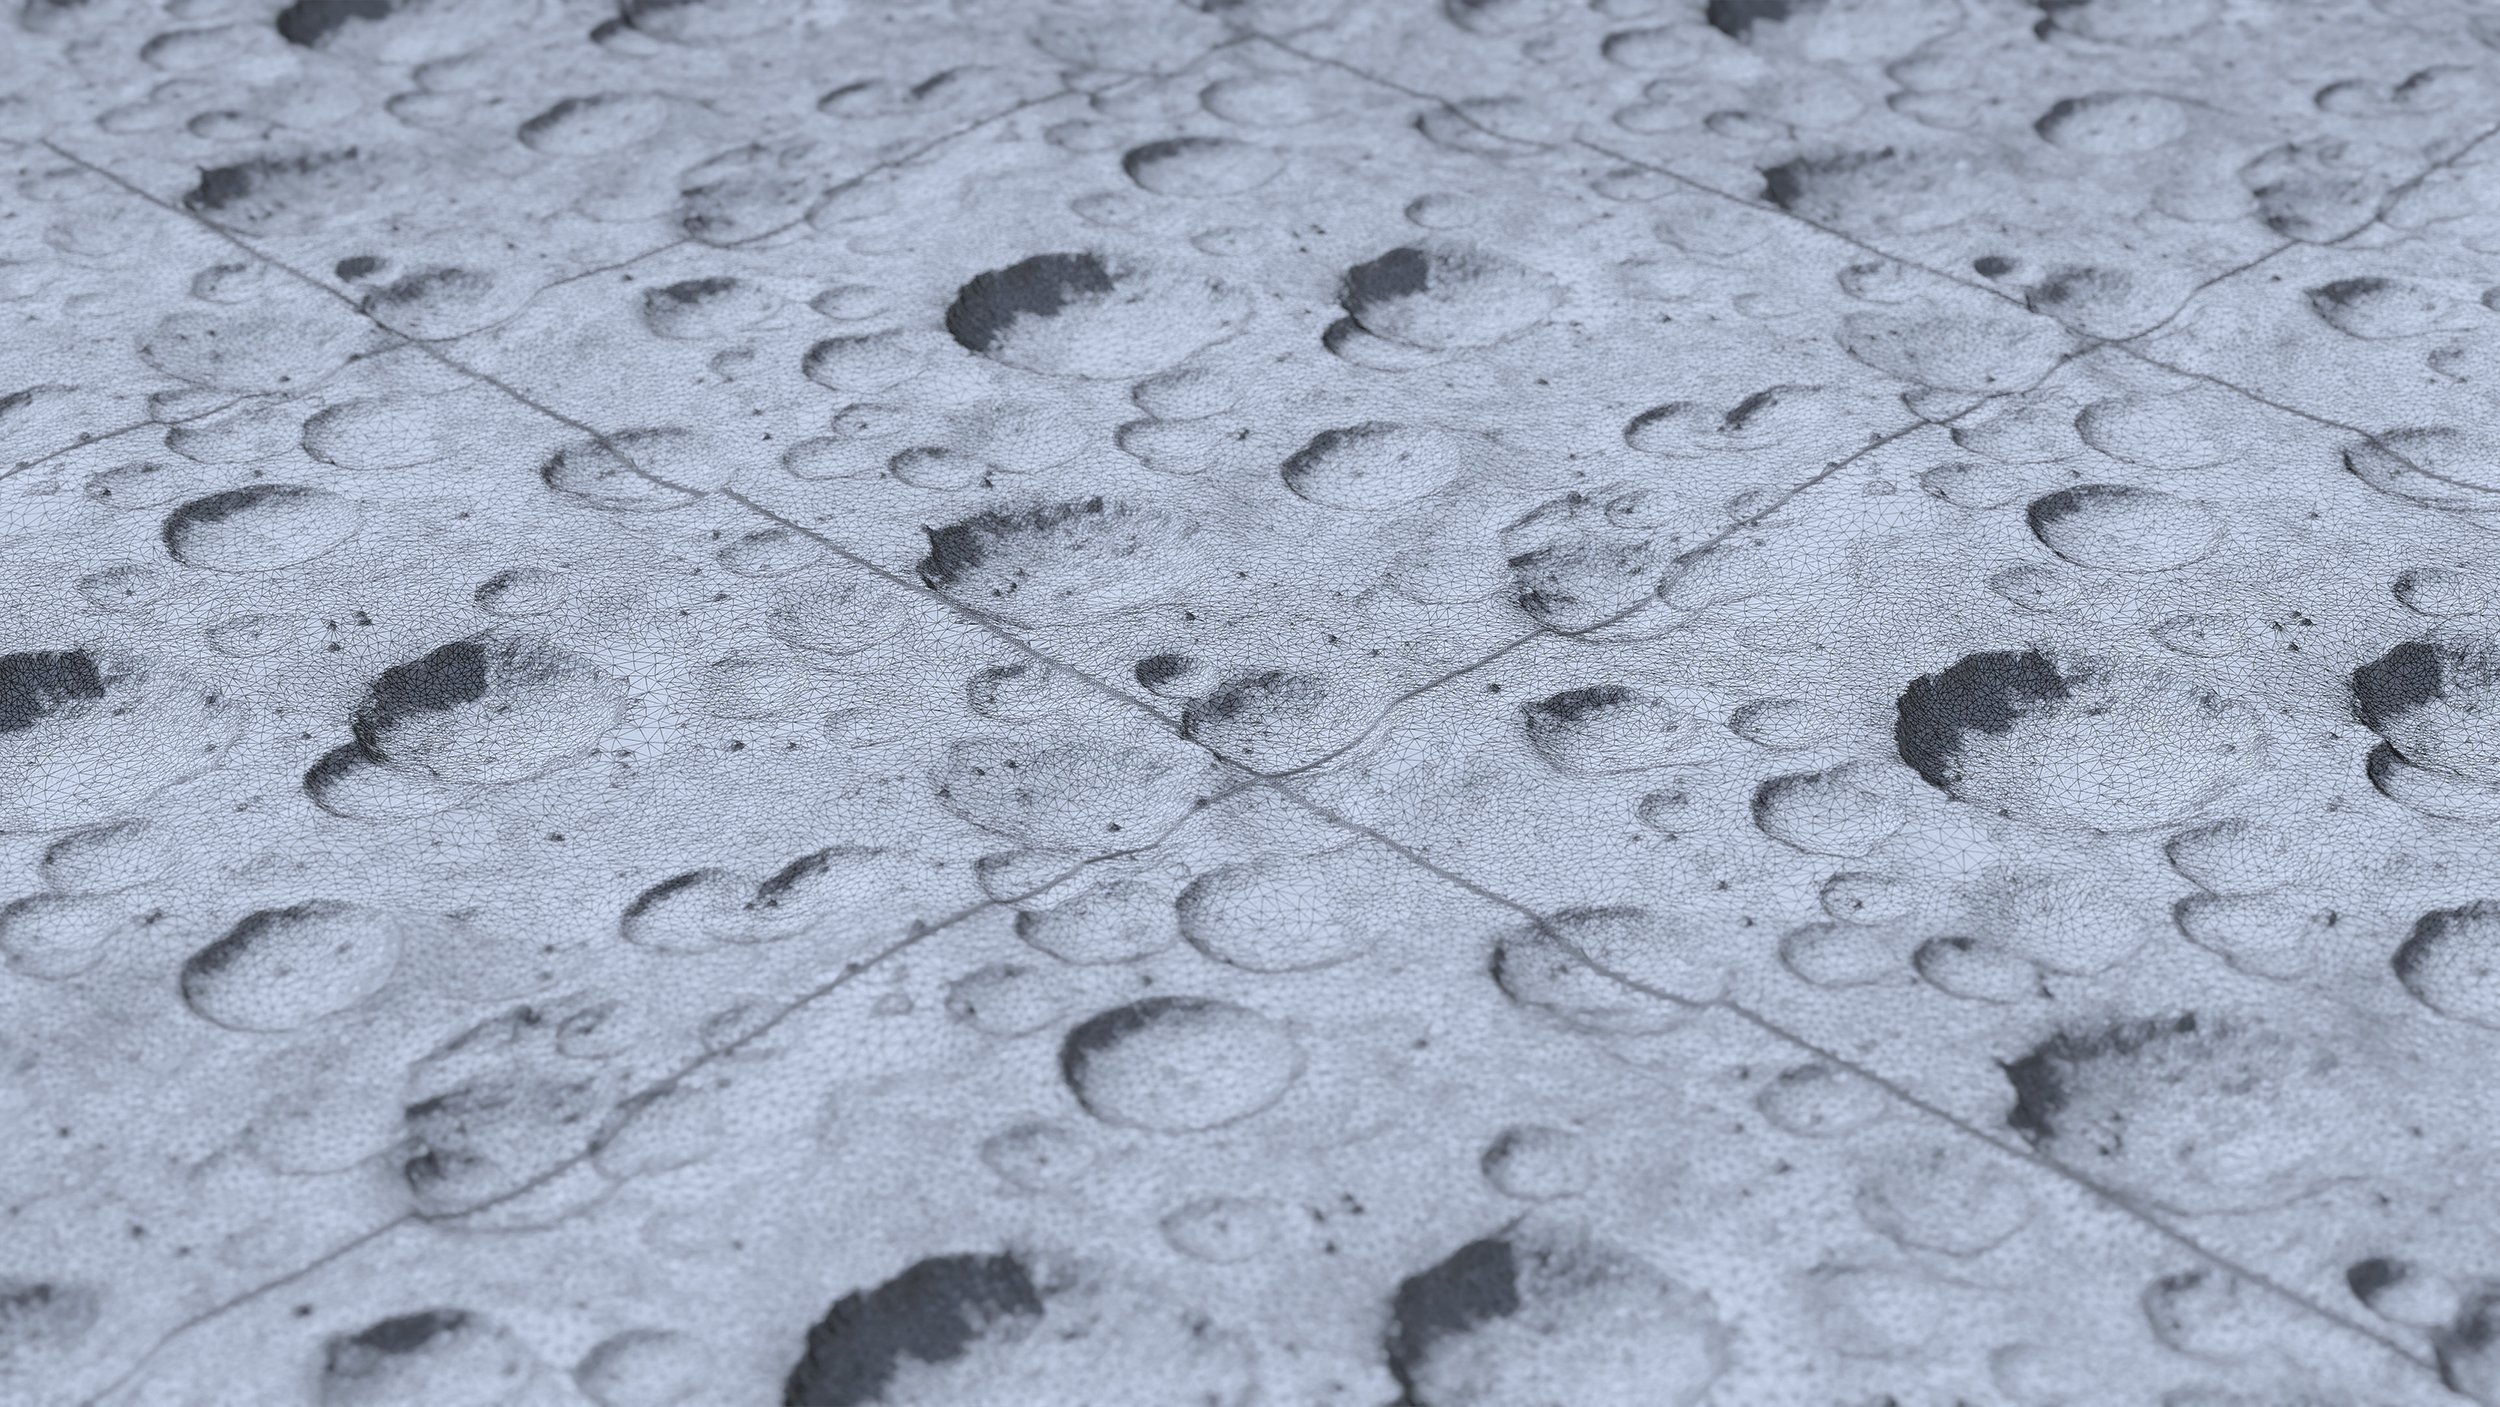 Small_craters_tileMesh_WIRE.jpg